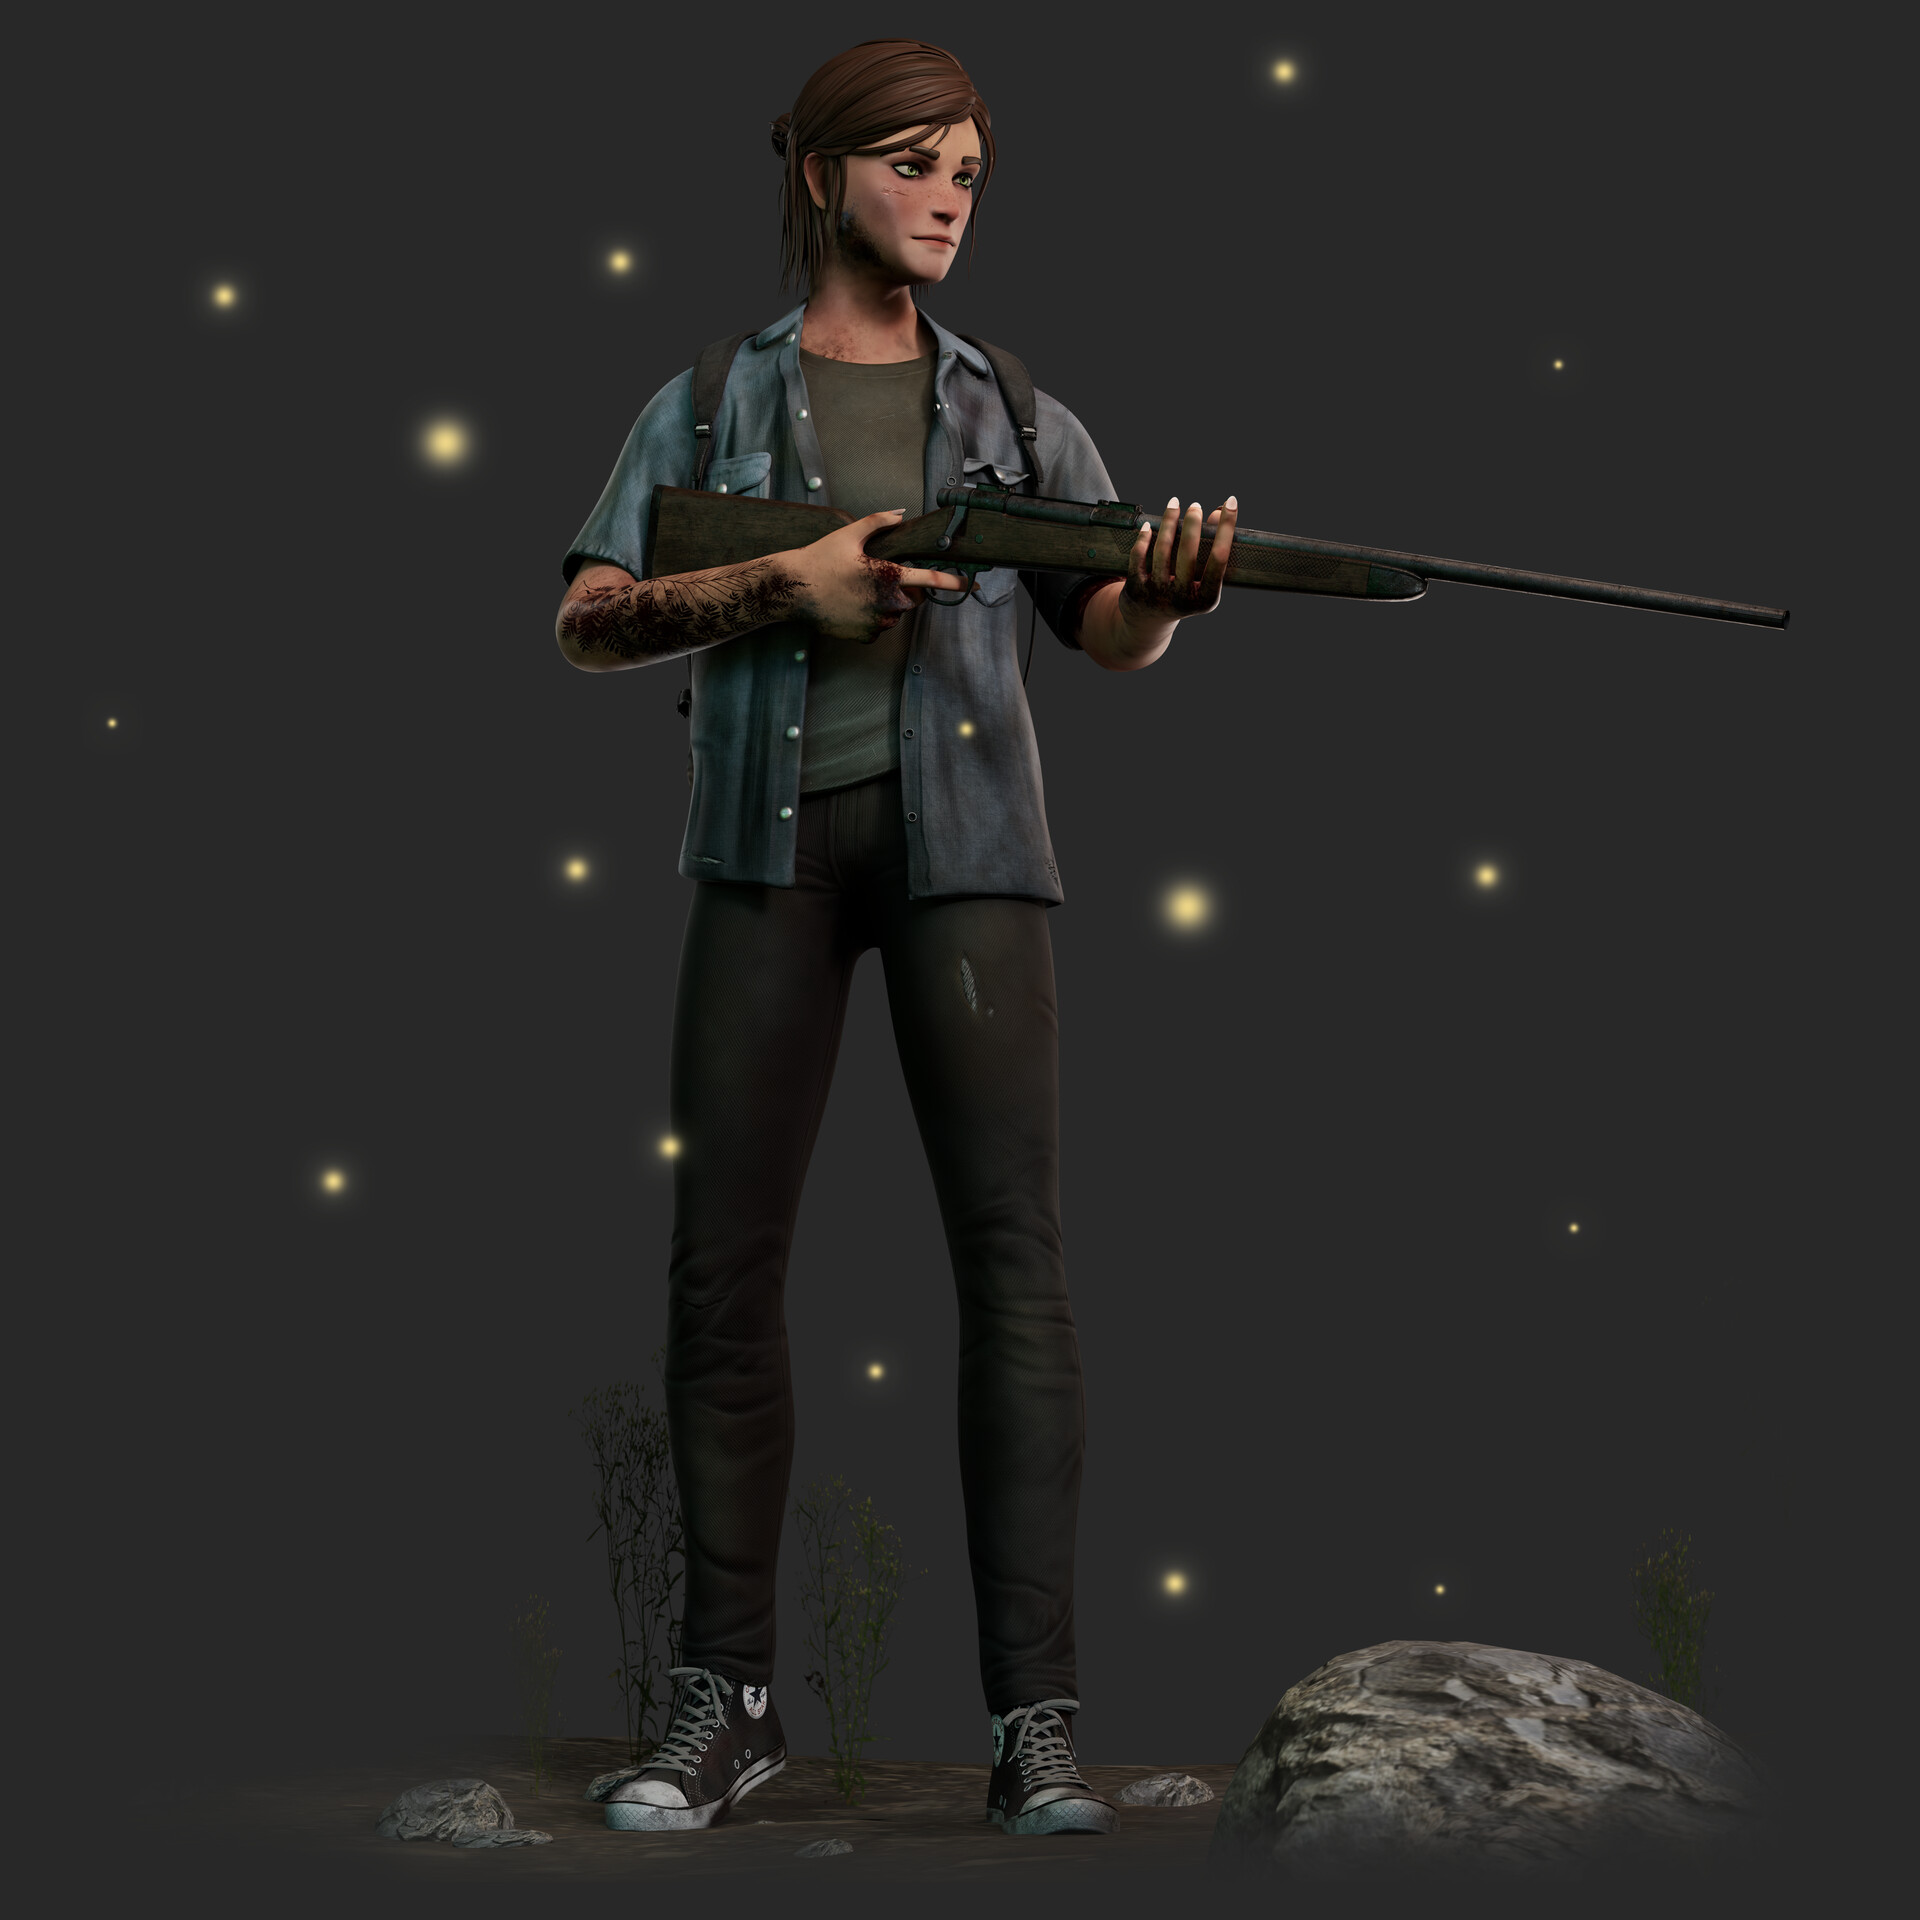 The Regressor, Low Poly Ellie from the Last of Us Part ll Model